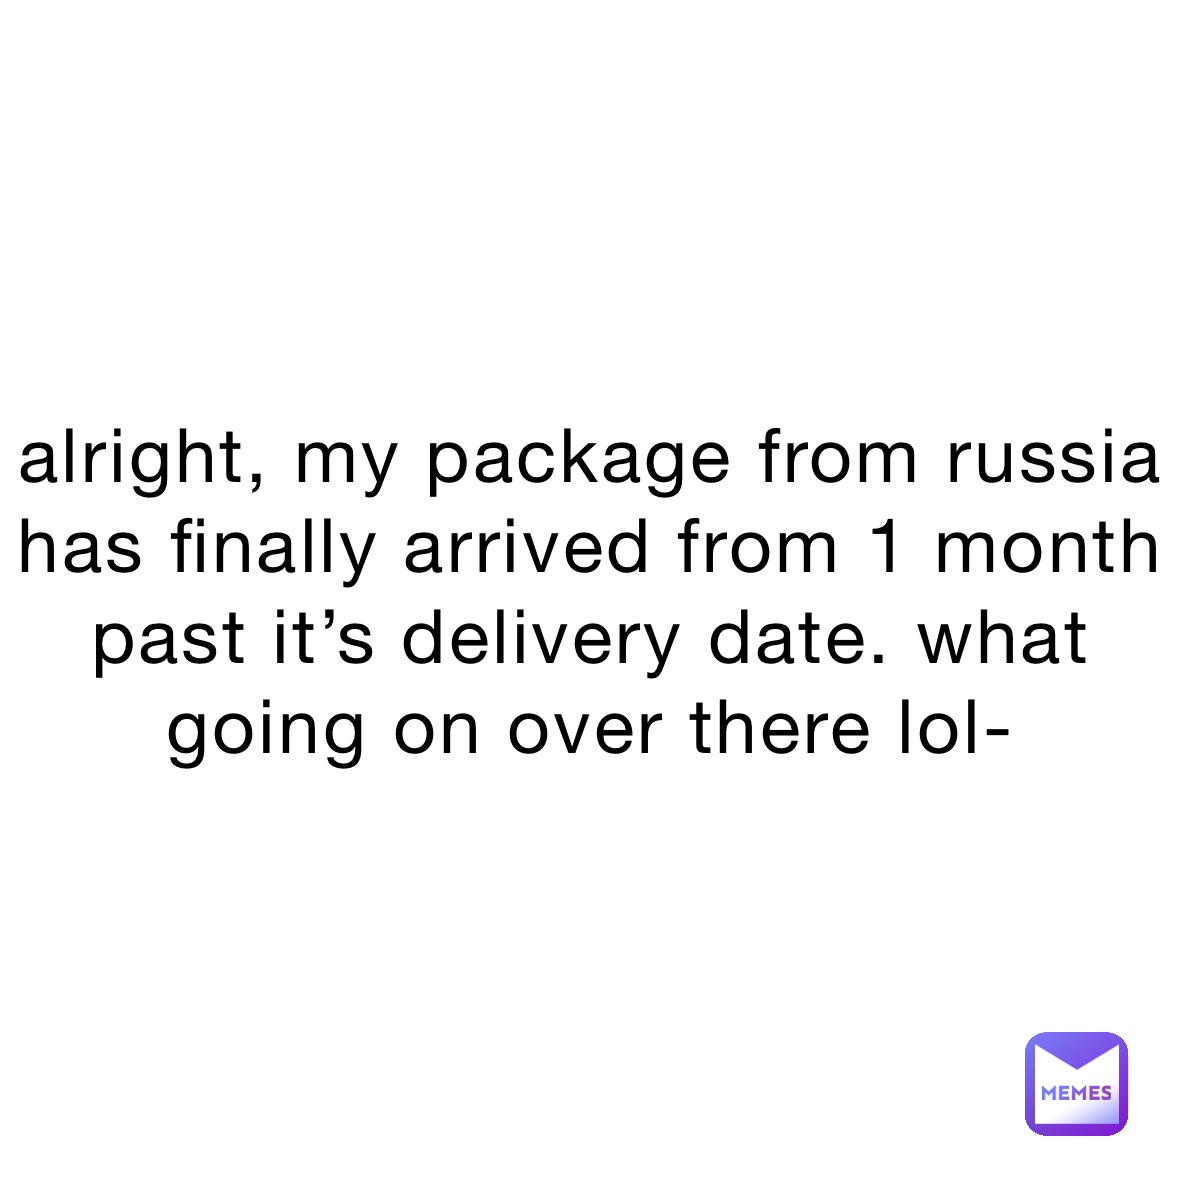 alright, my package from russia has finally arrived from 1 month past it’s delivery date. what going on over there lol-